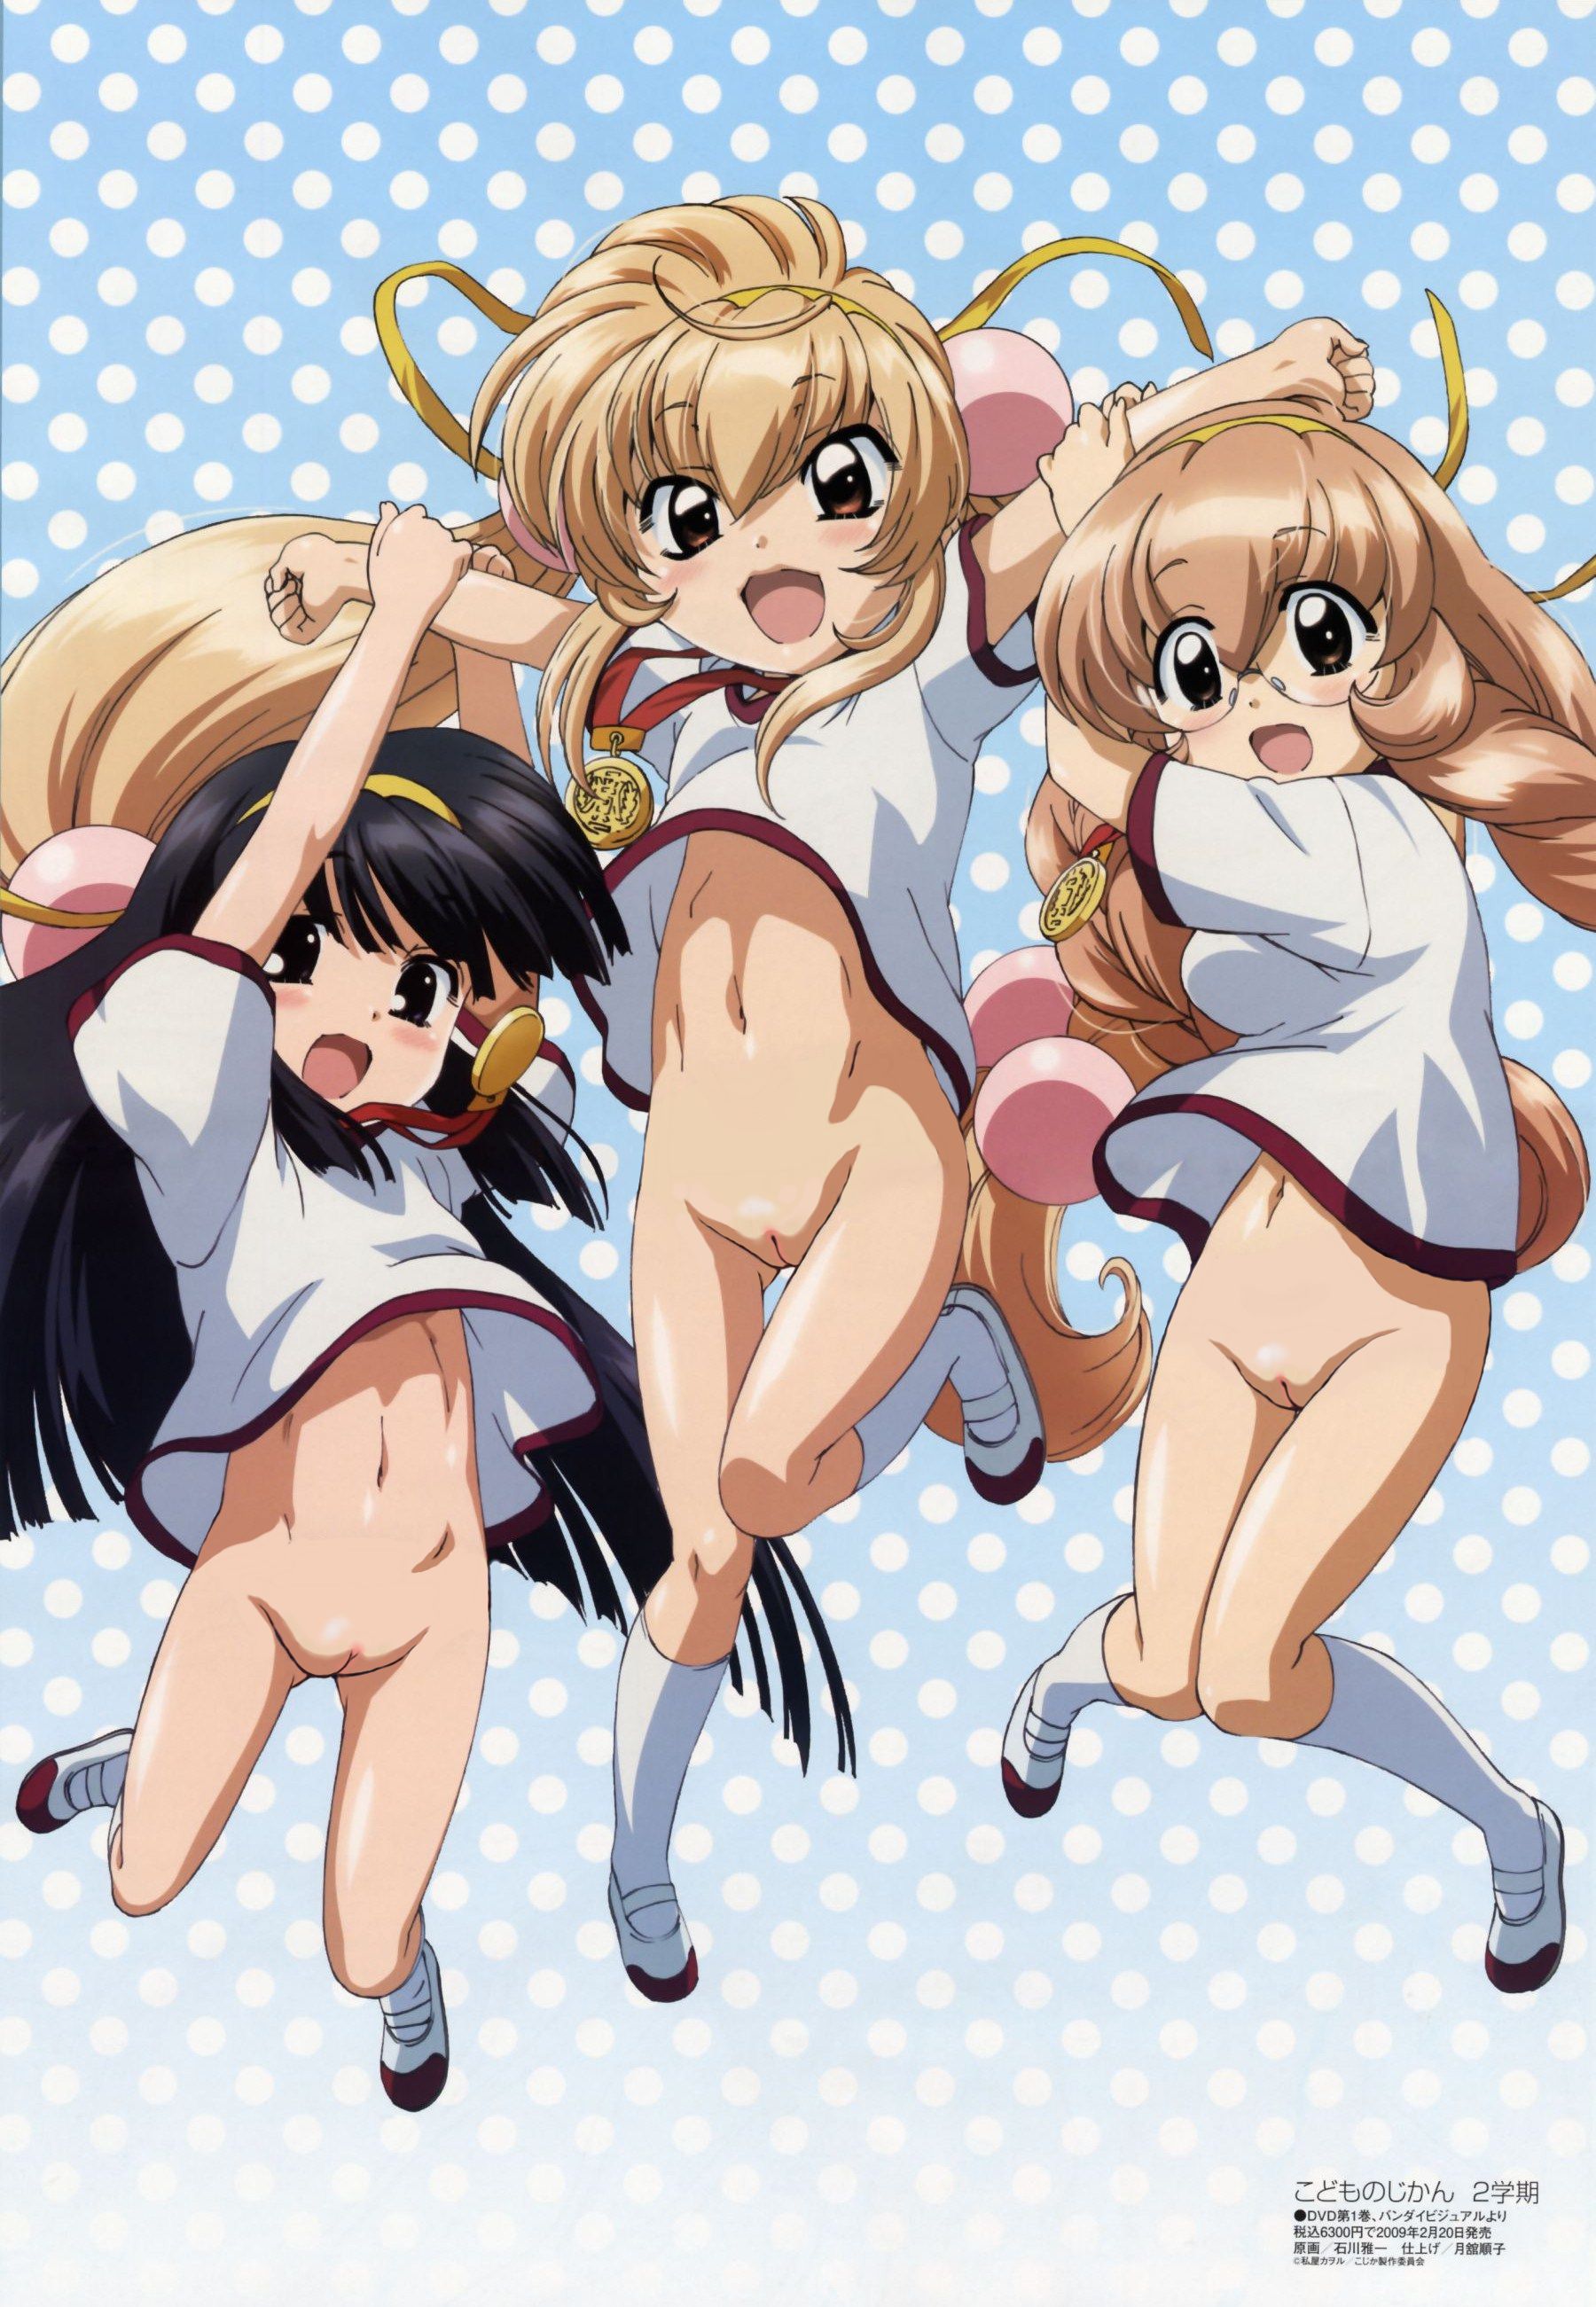 [Stripping Cora] drop a large amount of stripped cora image, such as anime official picture Part 269 5